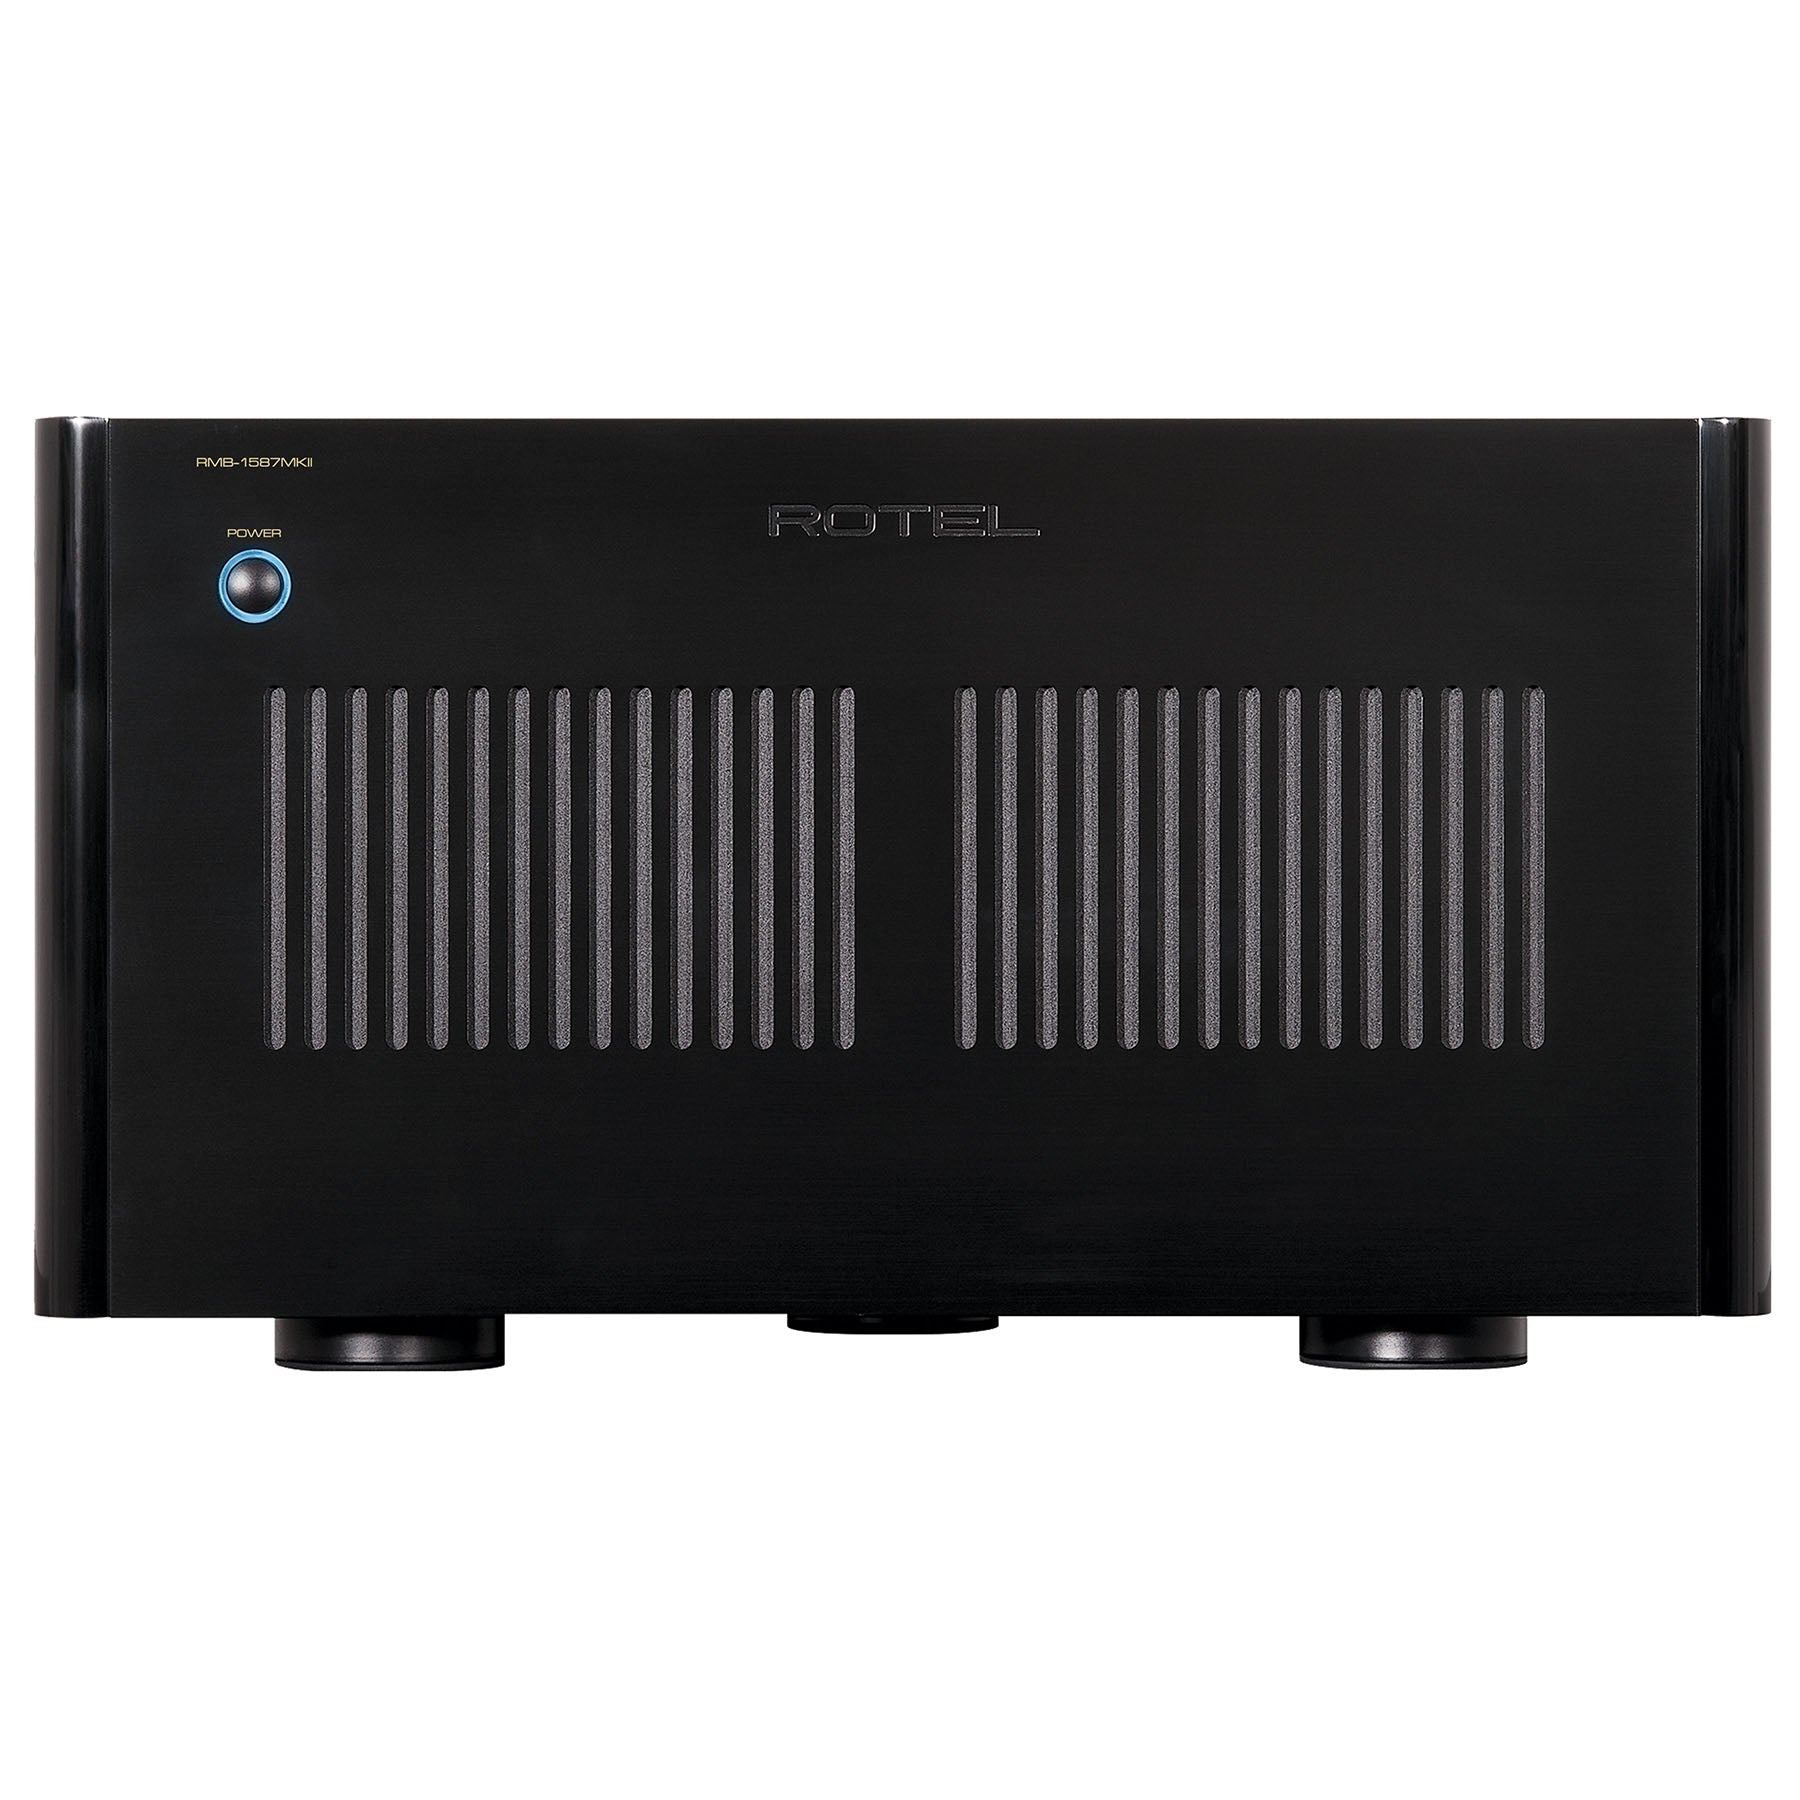 Rotel RMB-1587MKII Multi-Channel Power Amplifier